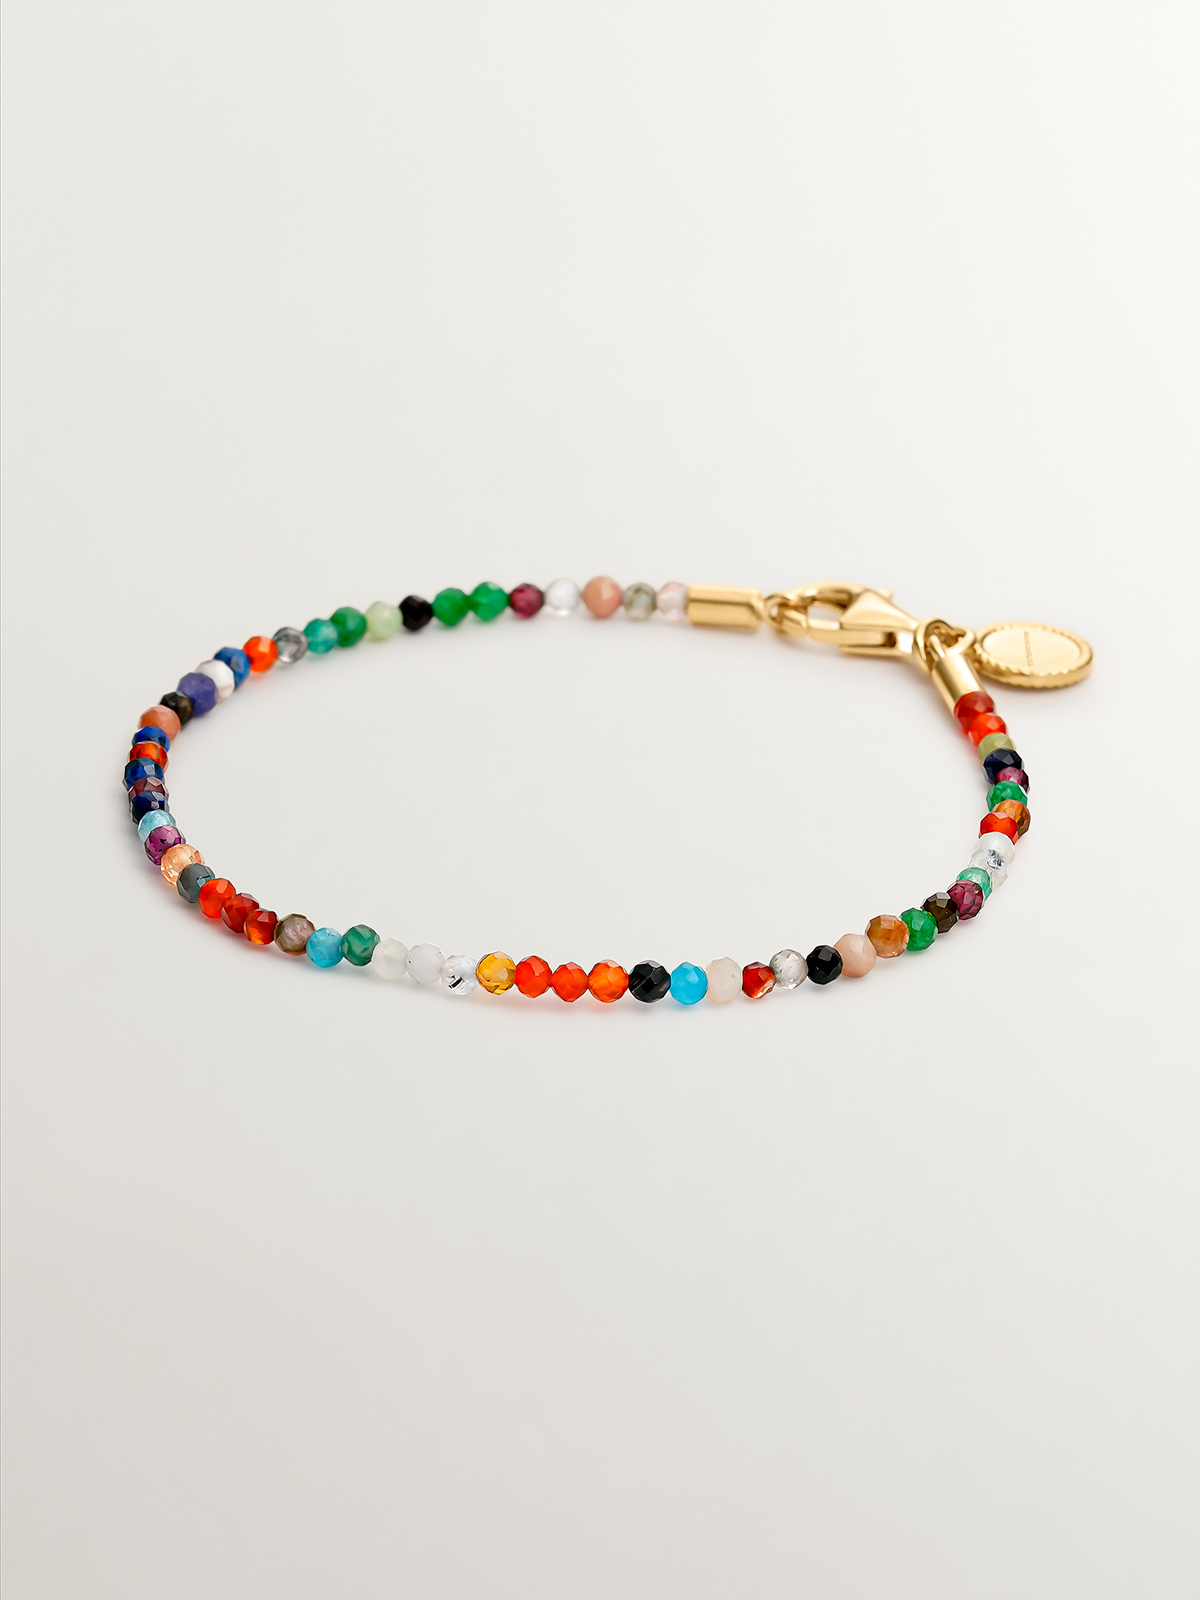 925 Silver bracelet bathed in 18K yellow gold with multicolor gemstone beads.